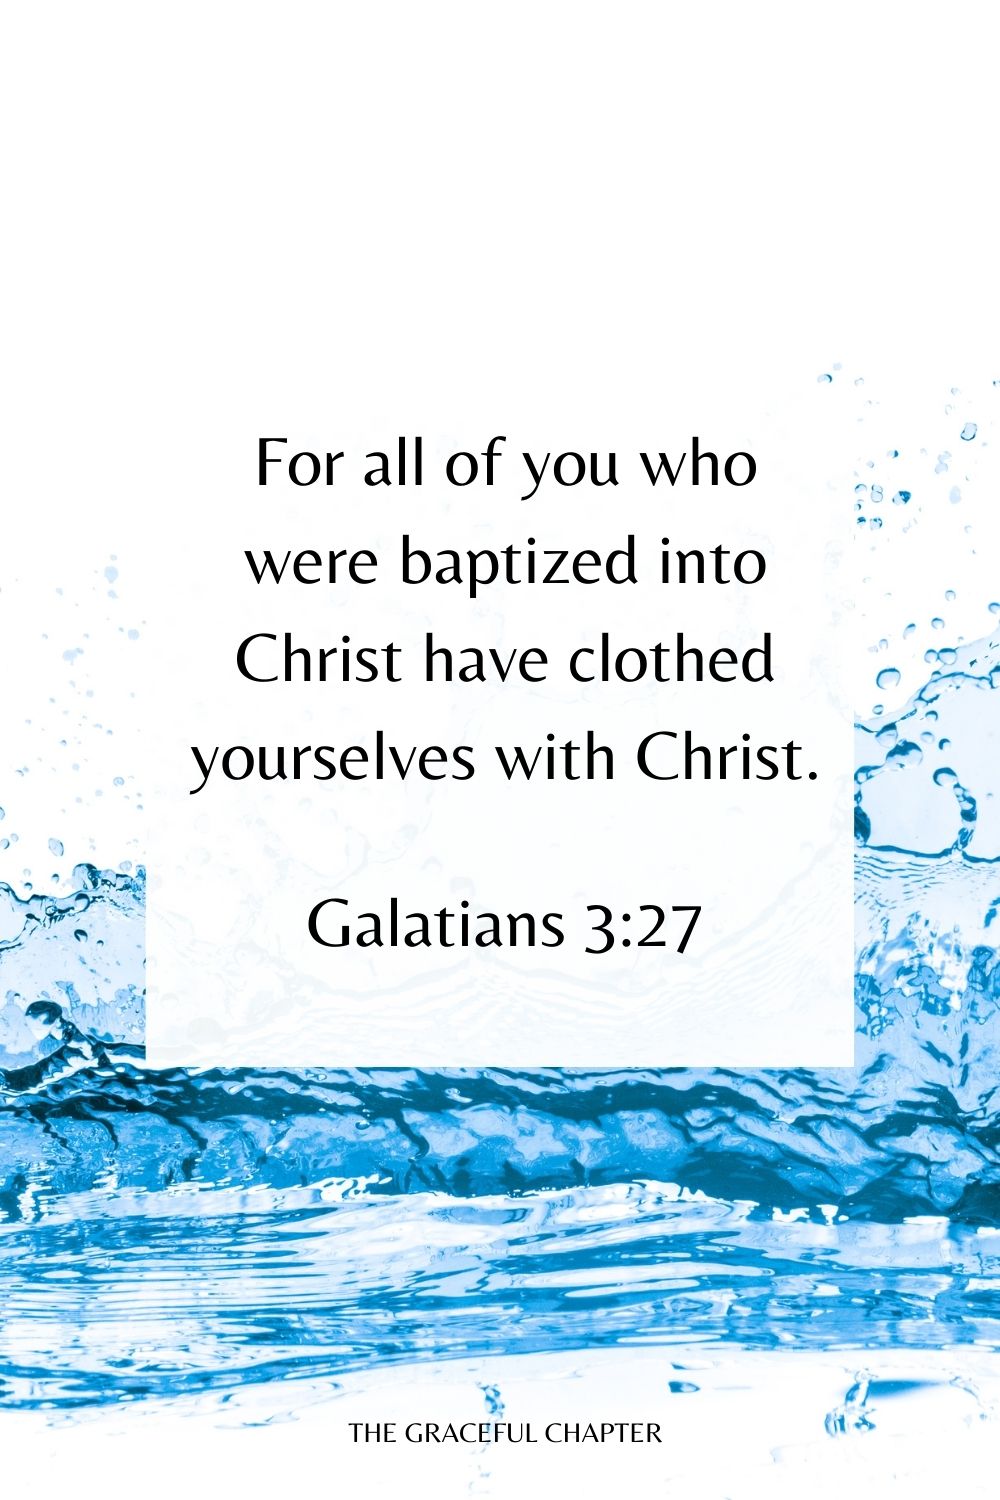 For all of you who were baptized into Christ have clothed yourselves with Christ. Galatians 3:27